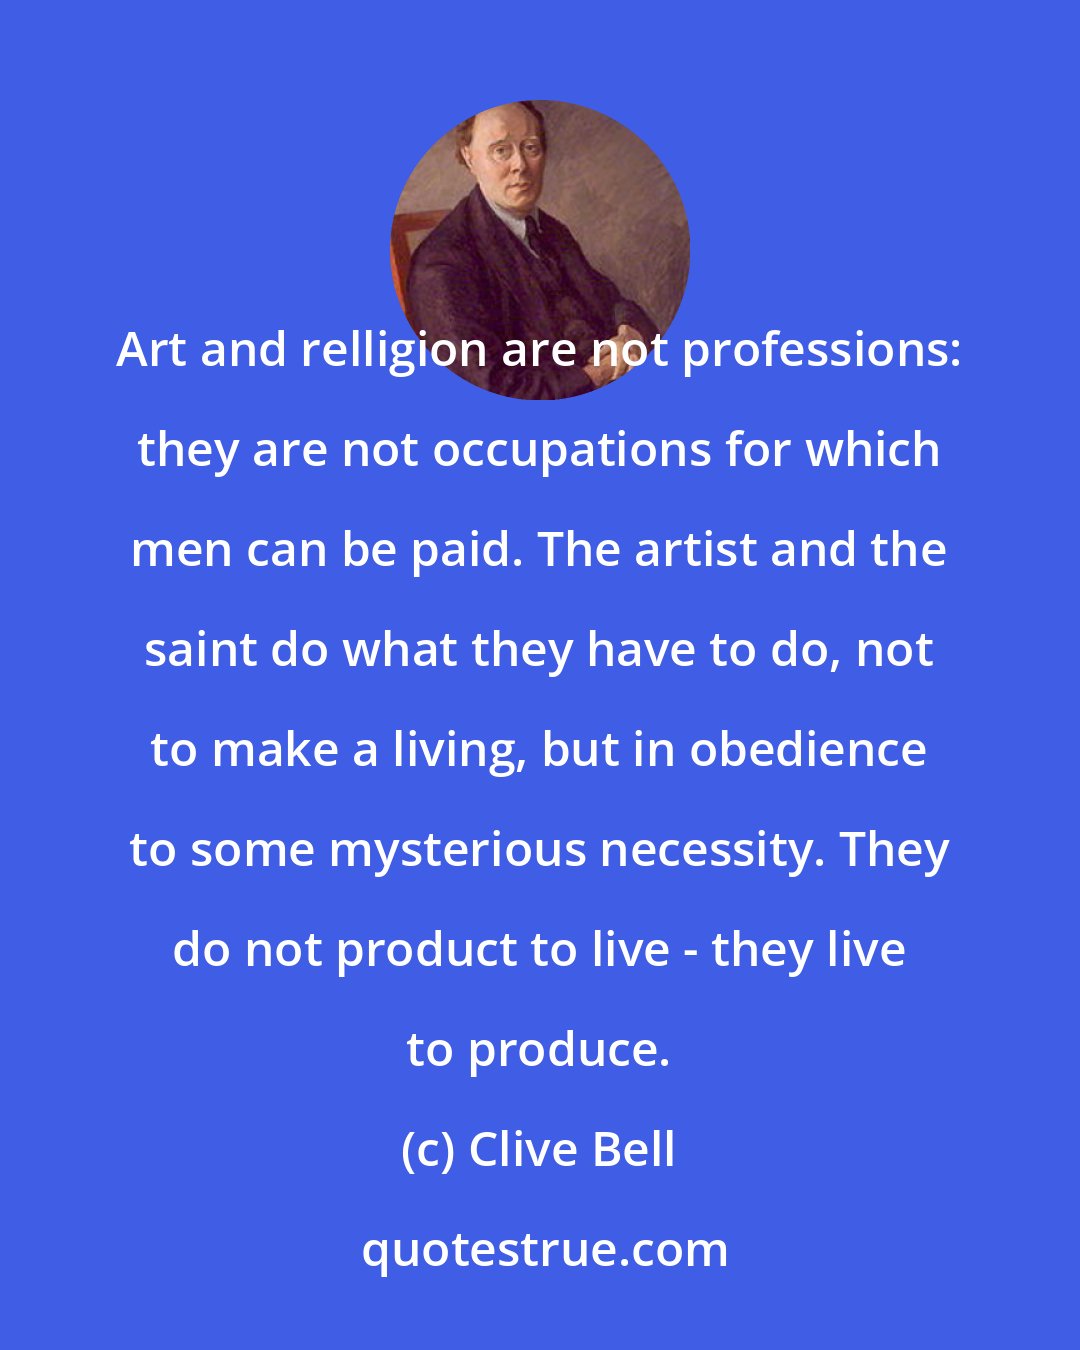 Clive Bell: Art and relligion are not professions: they are not occupations for which men can be paid. The artist and the saint do what they have to do, not to make a living, but in obedience to some mysterious necessity. They do not product to live - they live to produce.